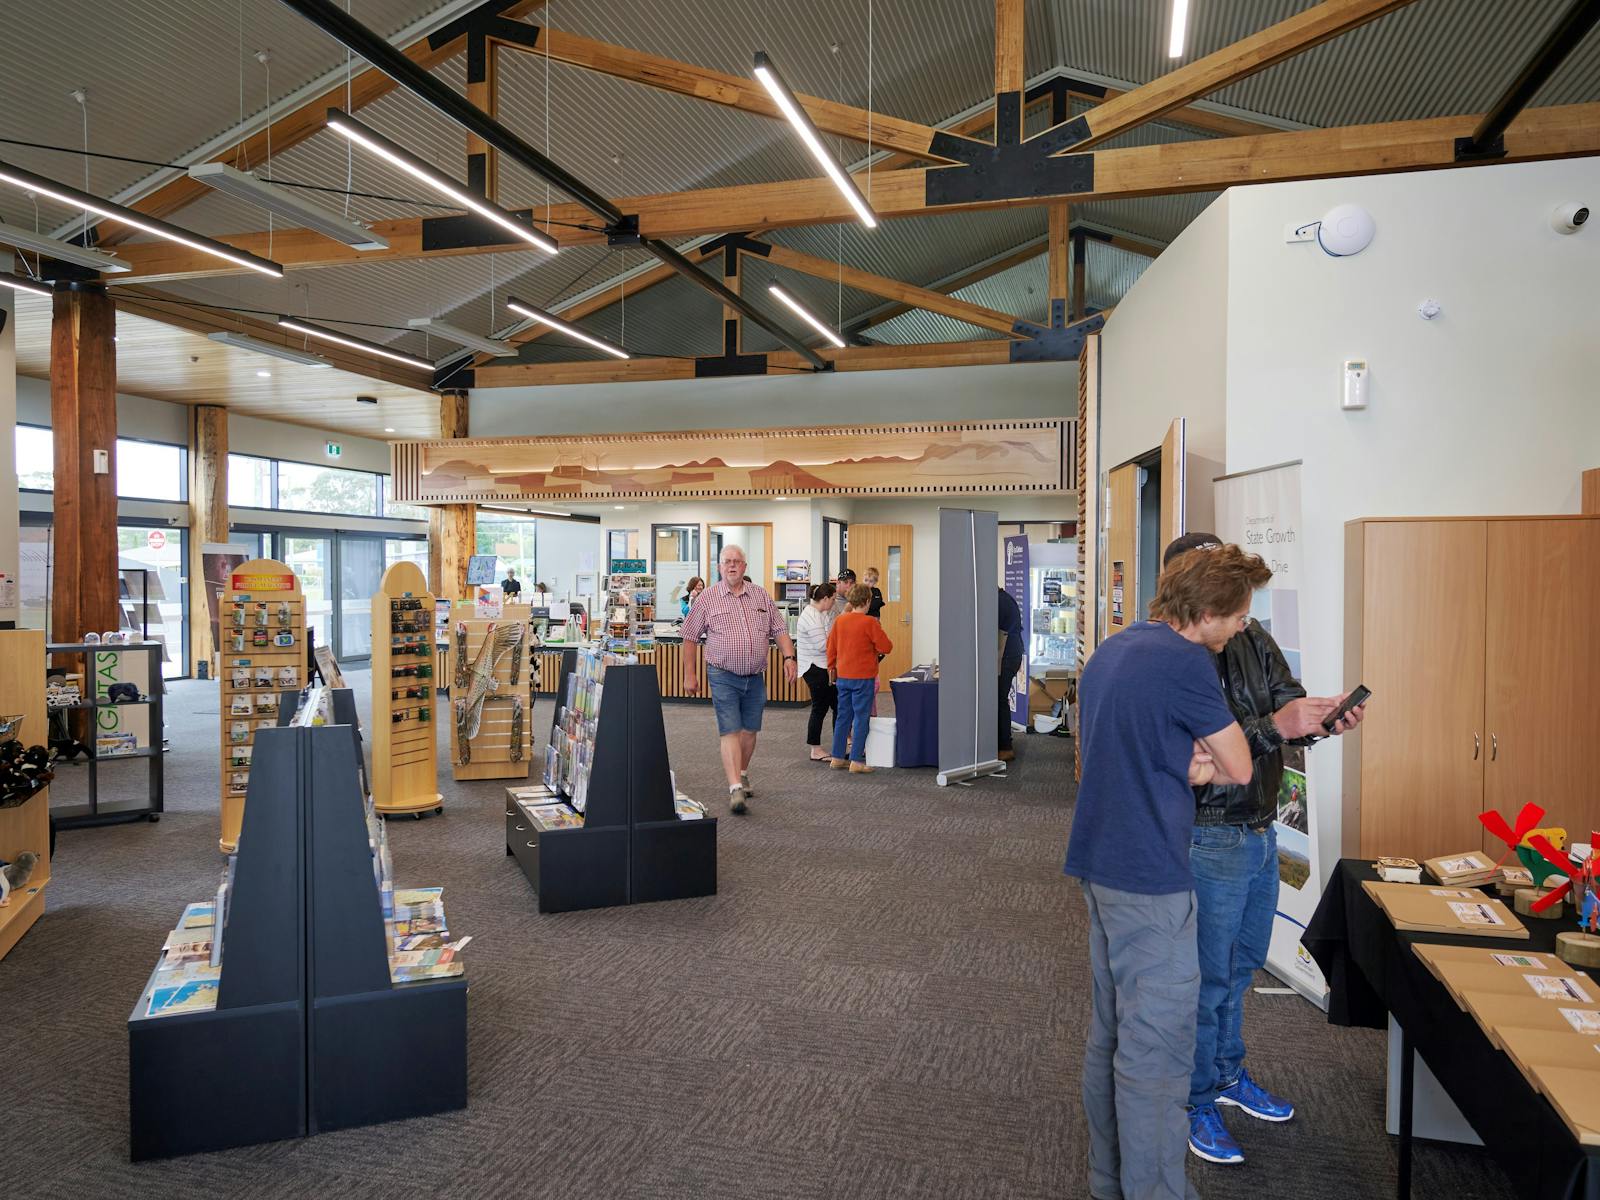 Inside the Smithton Visitor Information Centre with brochures and souvenirs.